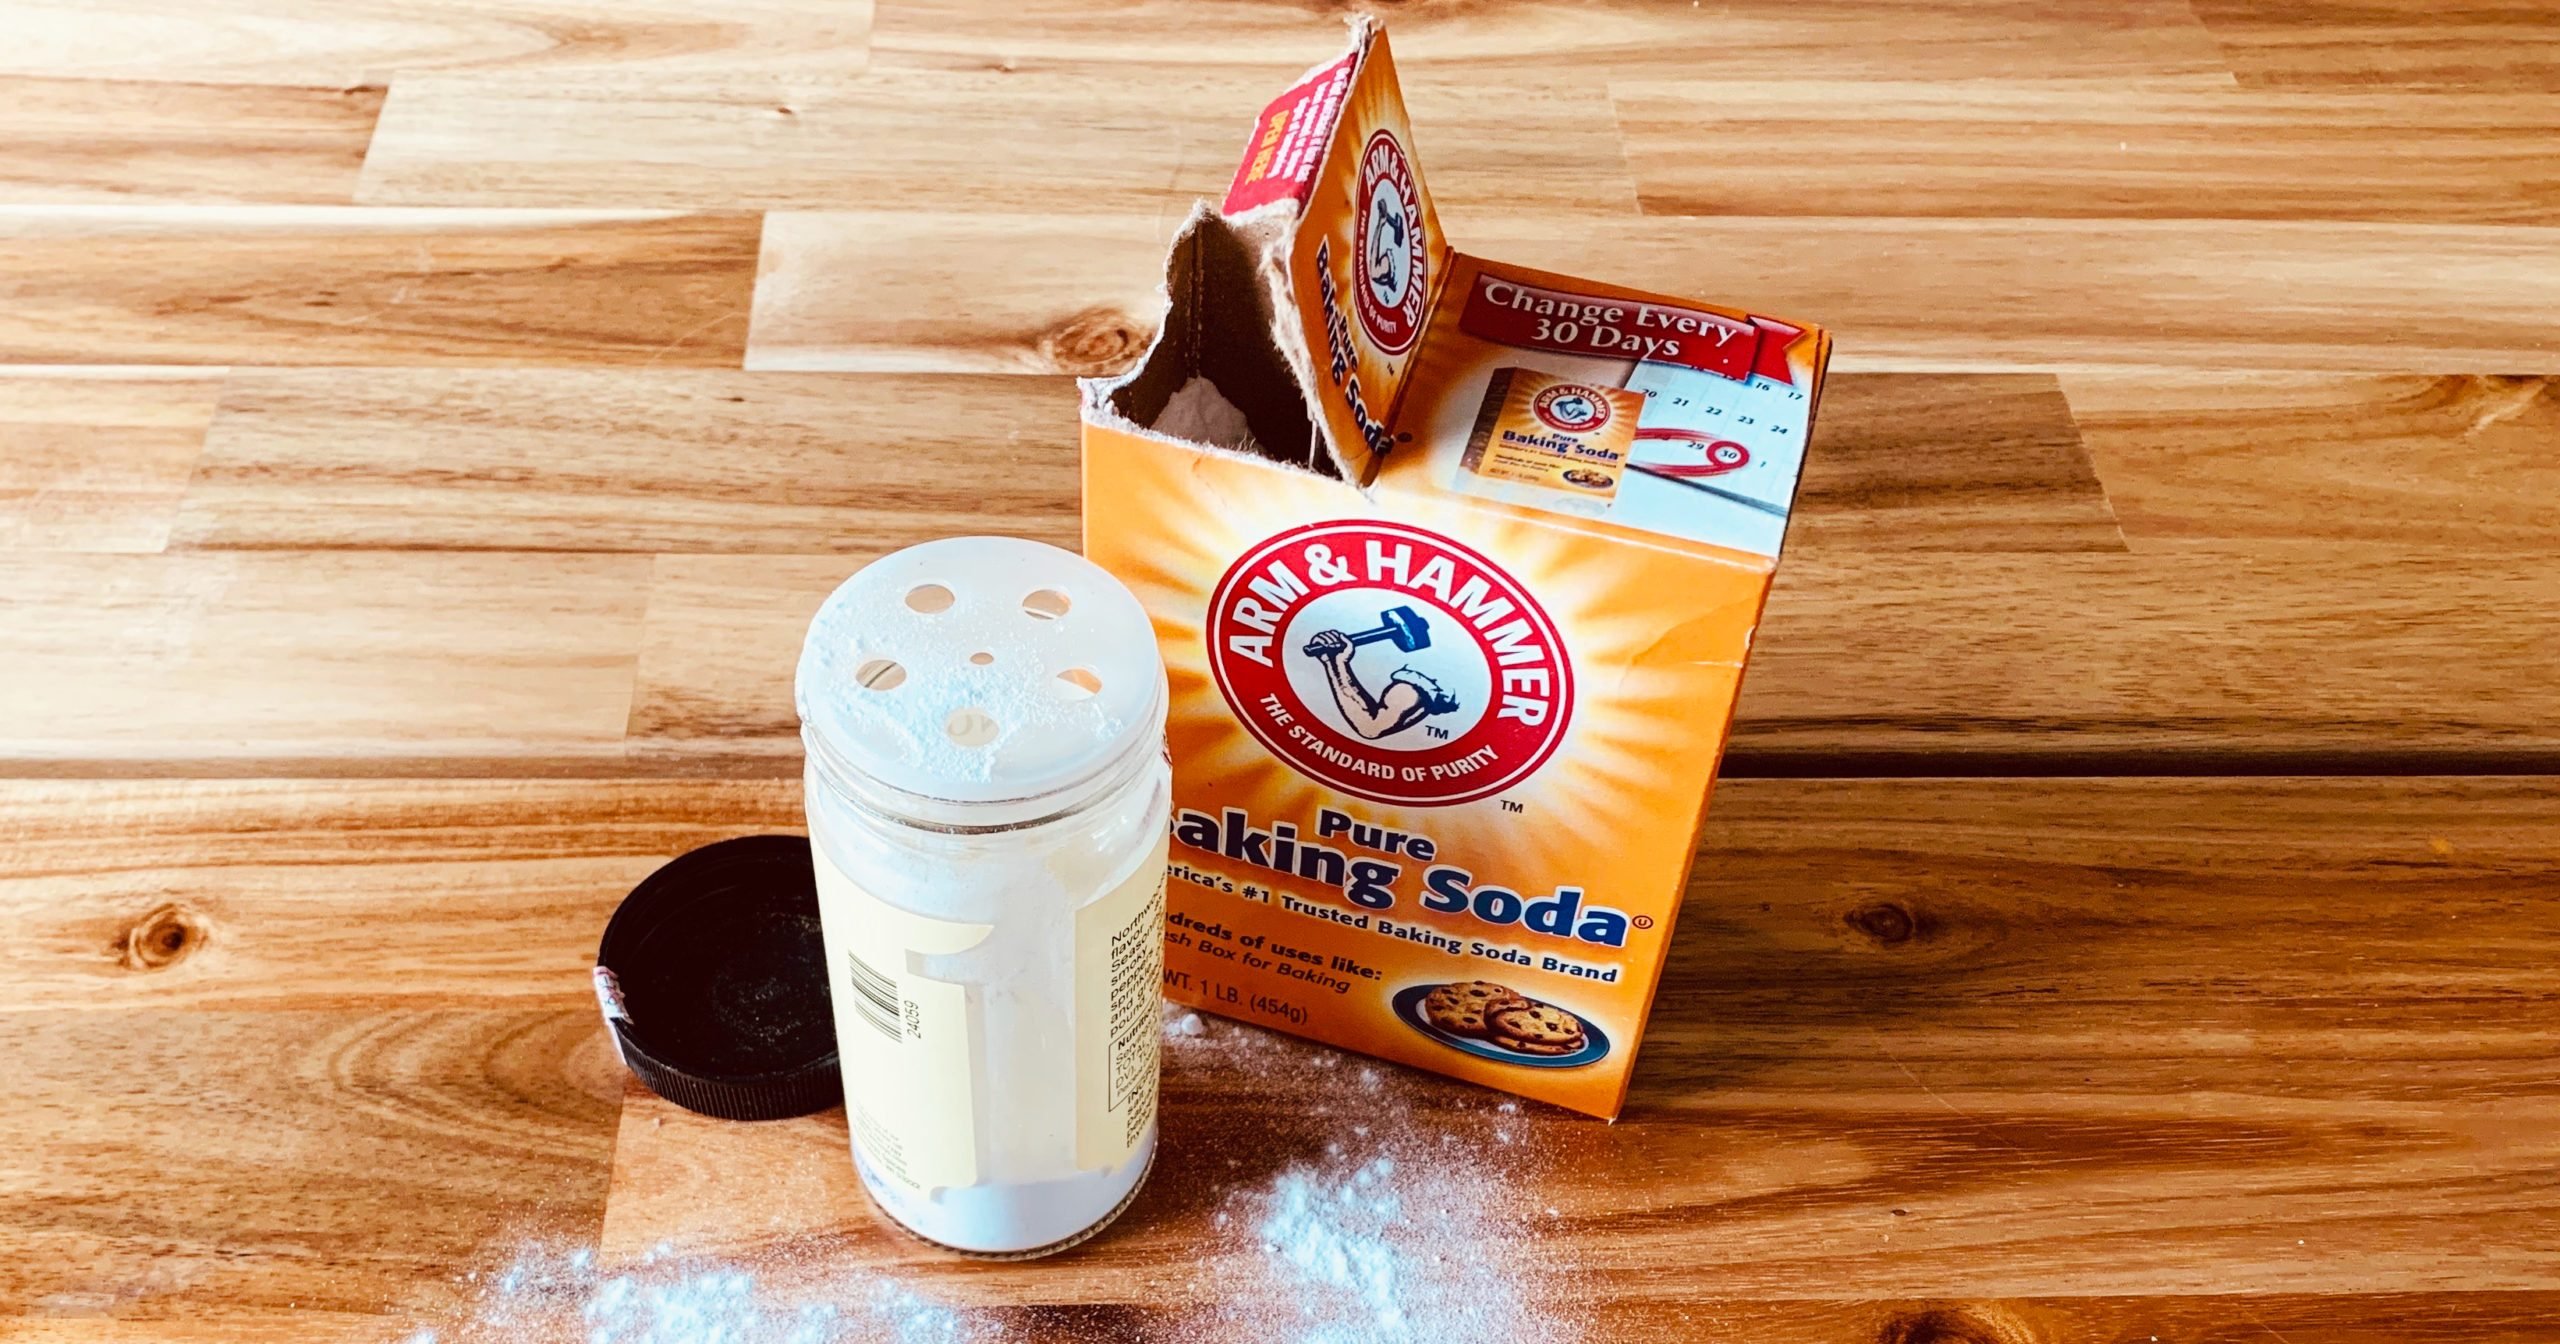 How to Store Baking Soda to Keep It Fresh